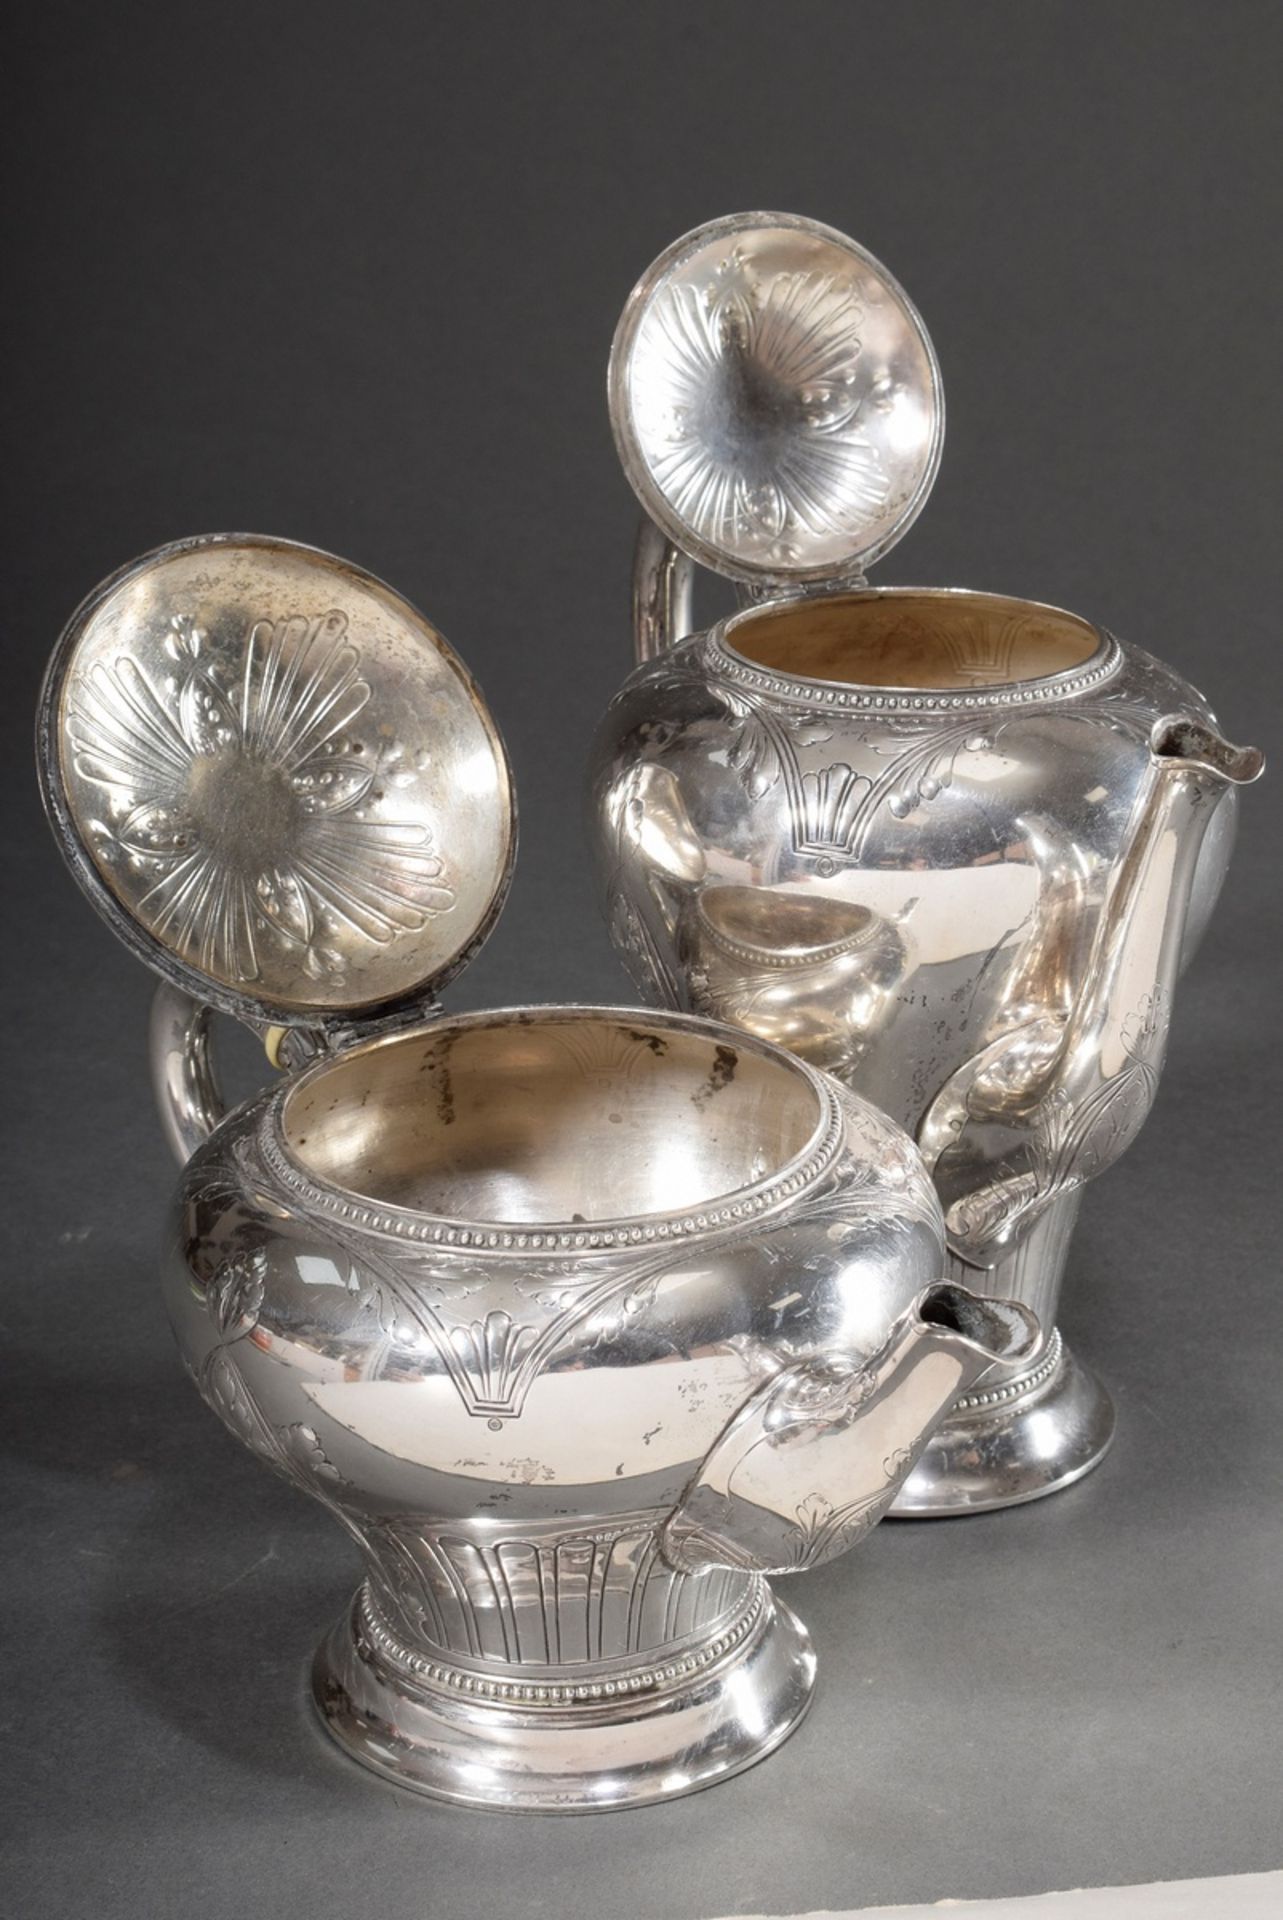 2 Various Art Nouveau coffee and tea pots with engraved and reliefed ornamental decoration and bead - Image 4 of 9